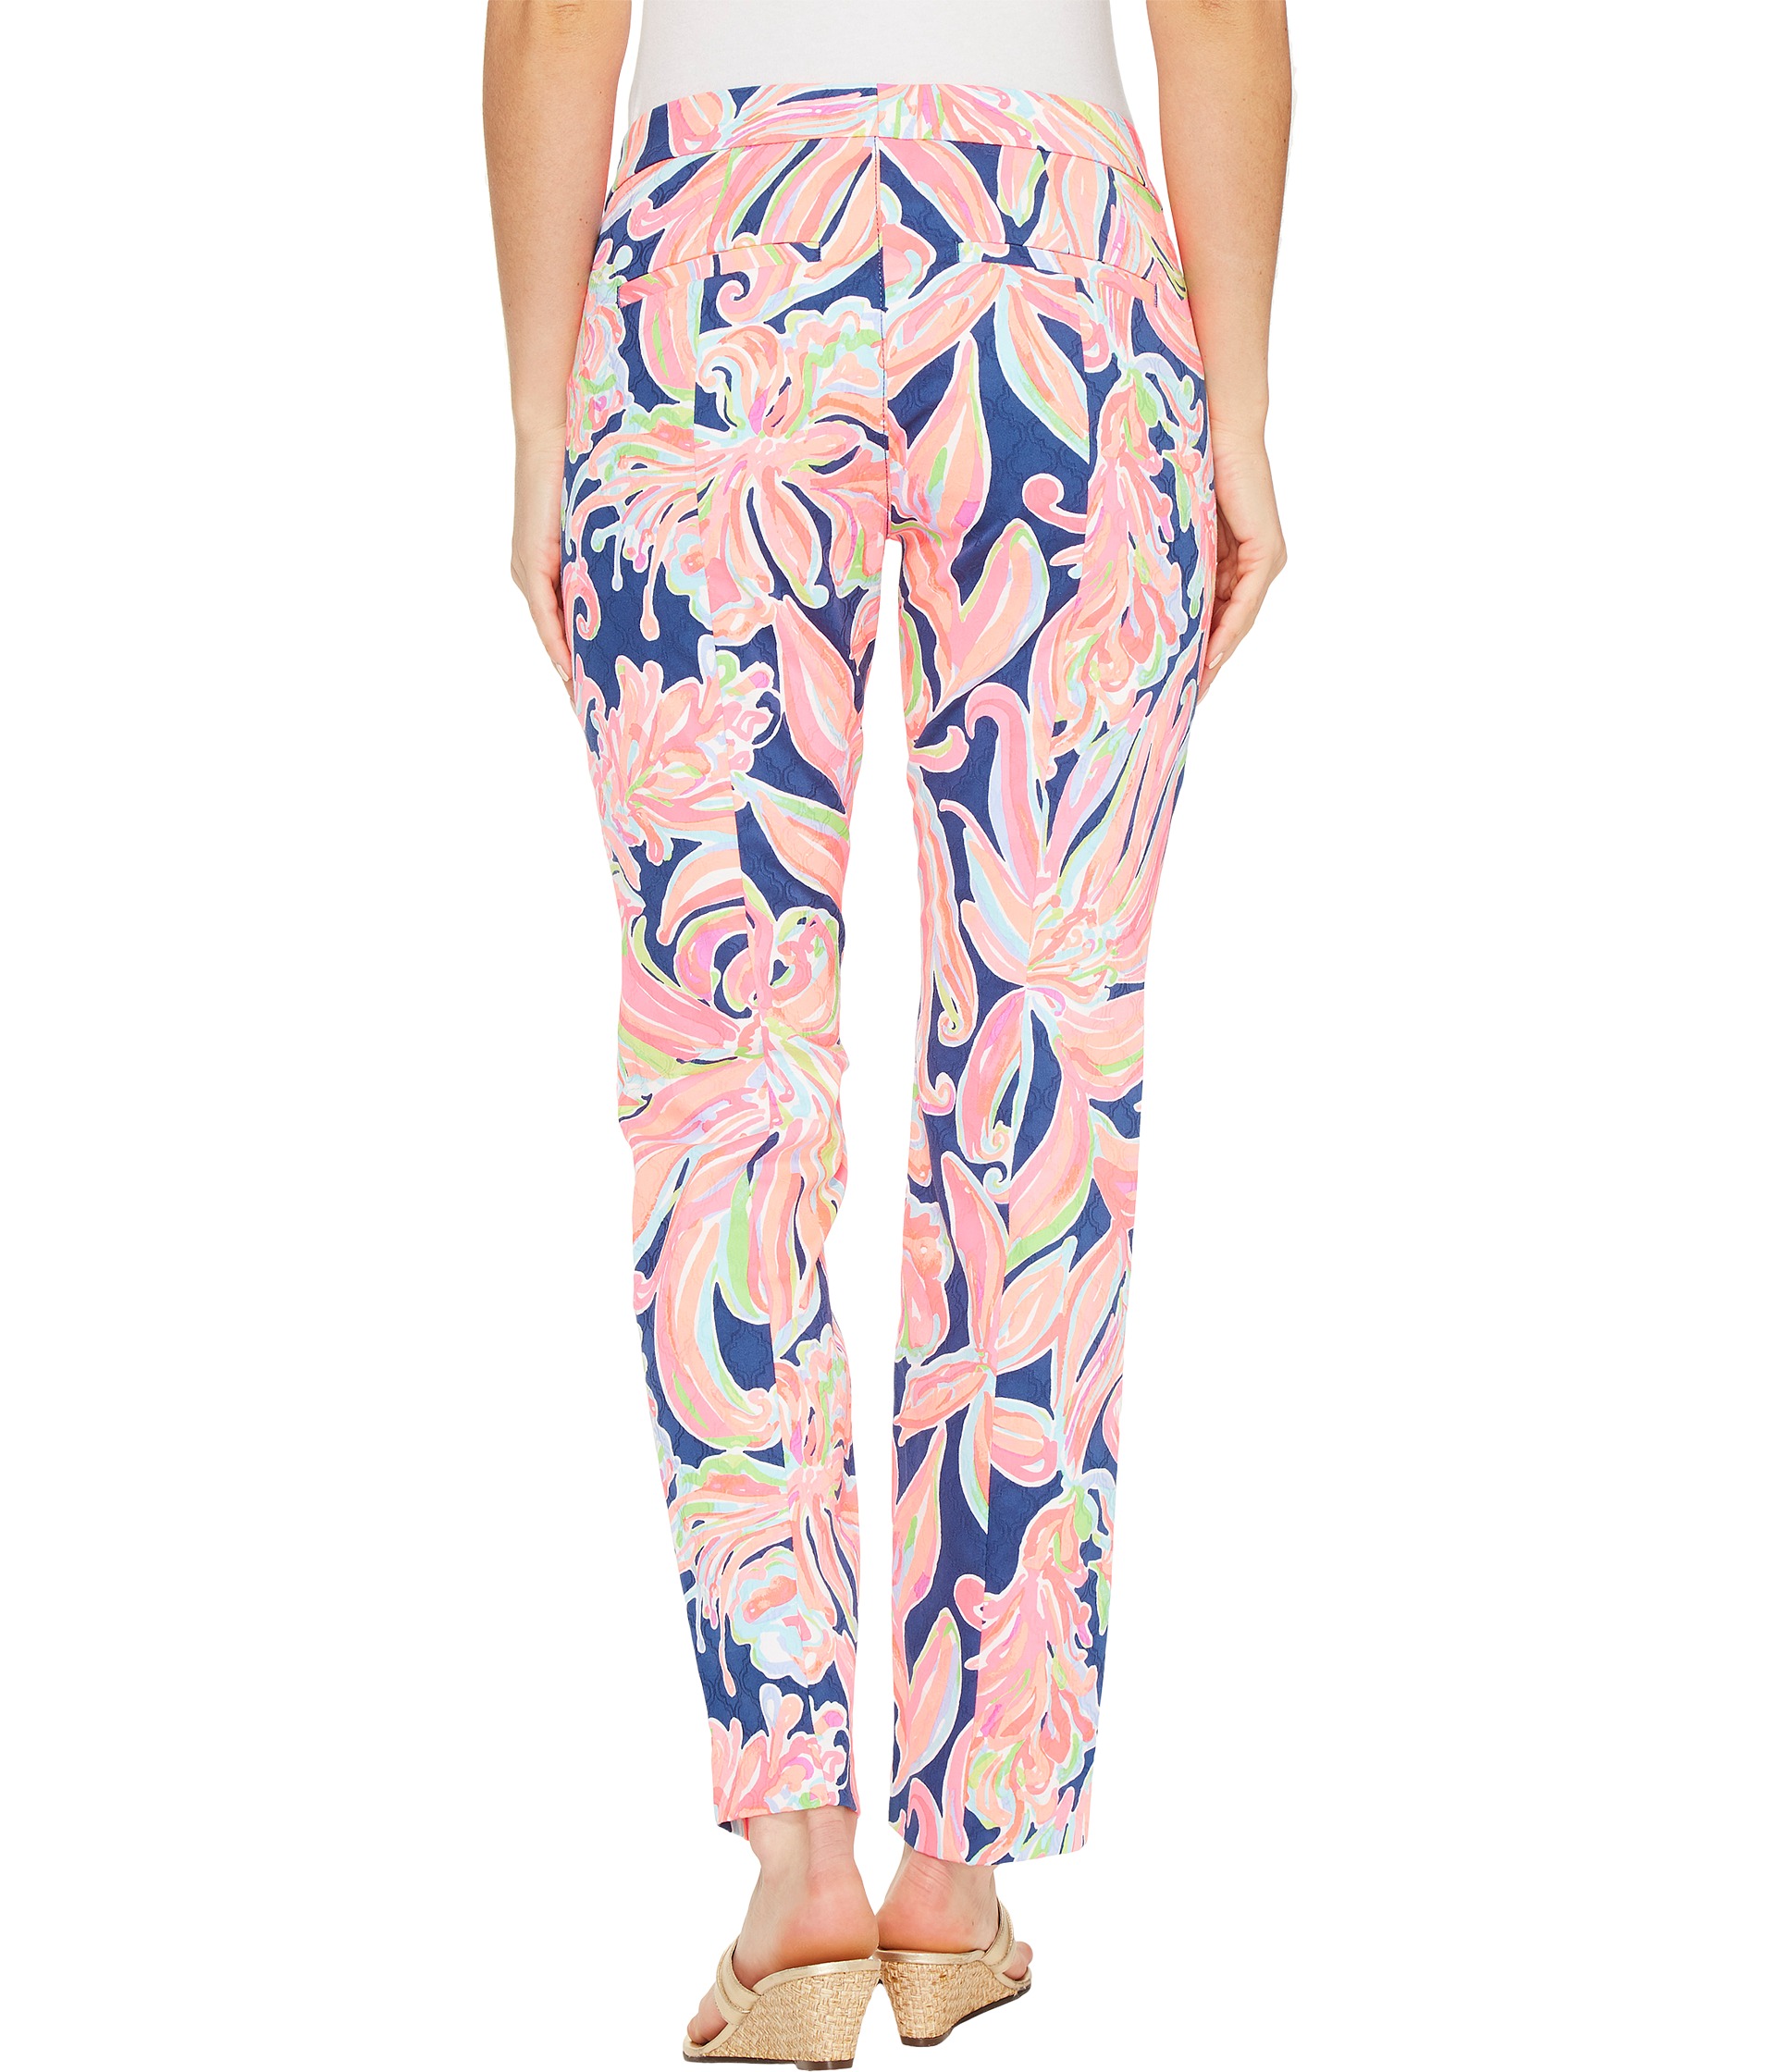 Lilly Pulitzer Kelly Skinny Ankle Pants at Zappos.com